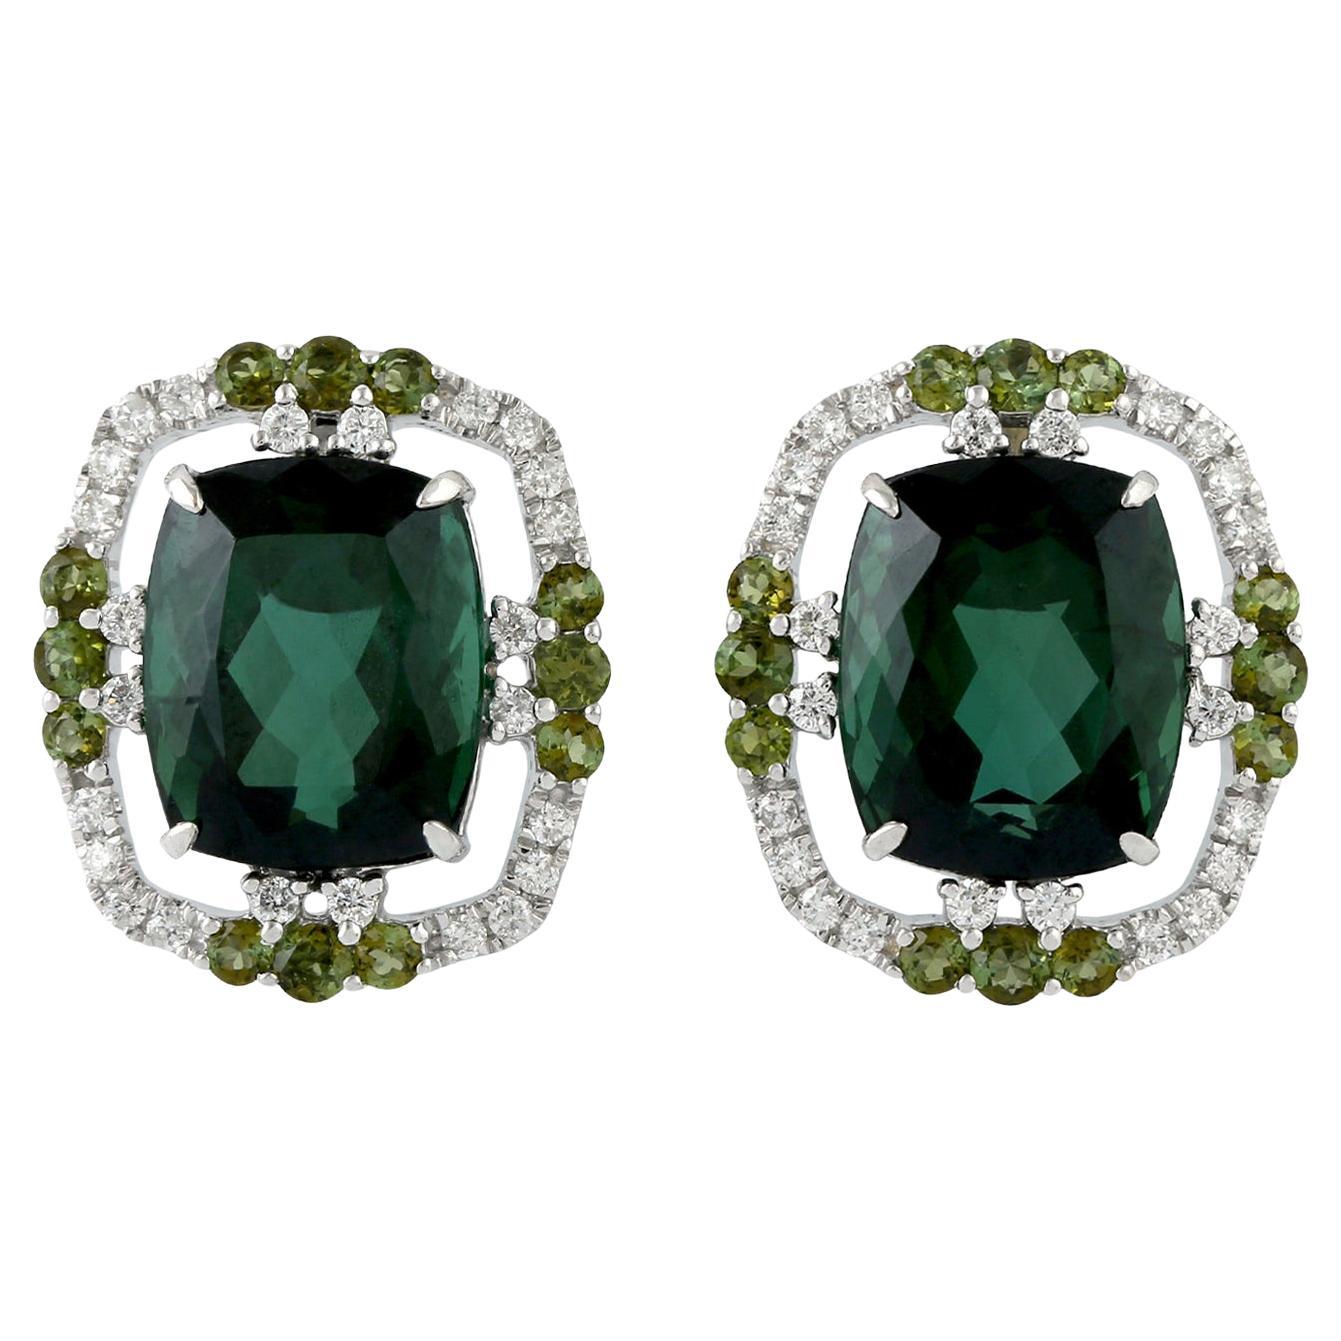 10.55 ct Green Tourmaline Studs With Diamonds Made In 18k White Gold For Sale